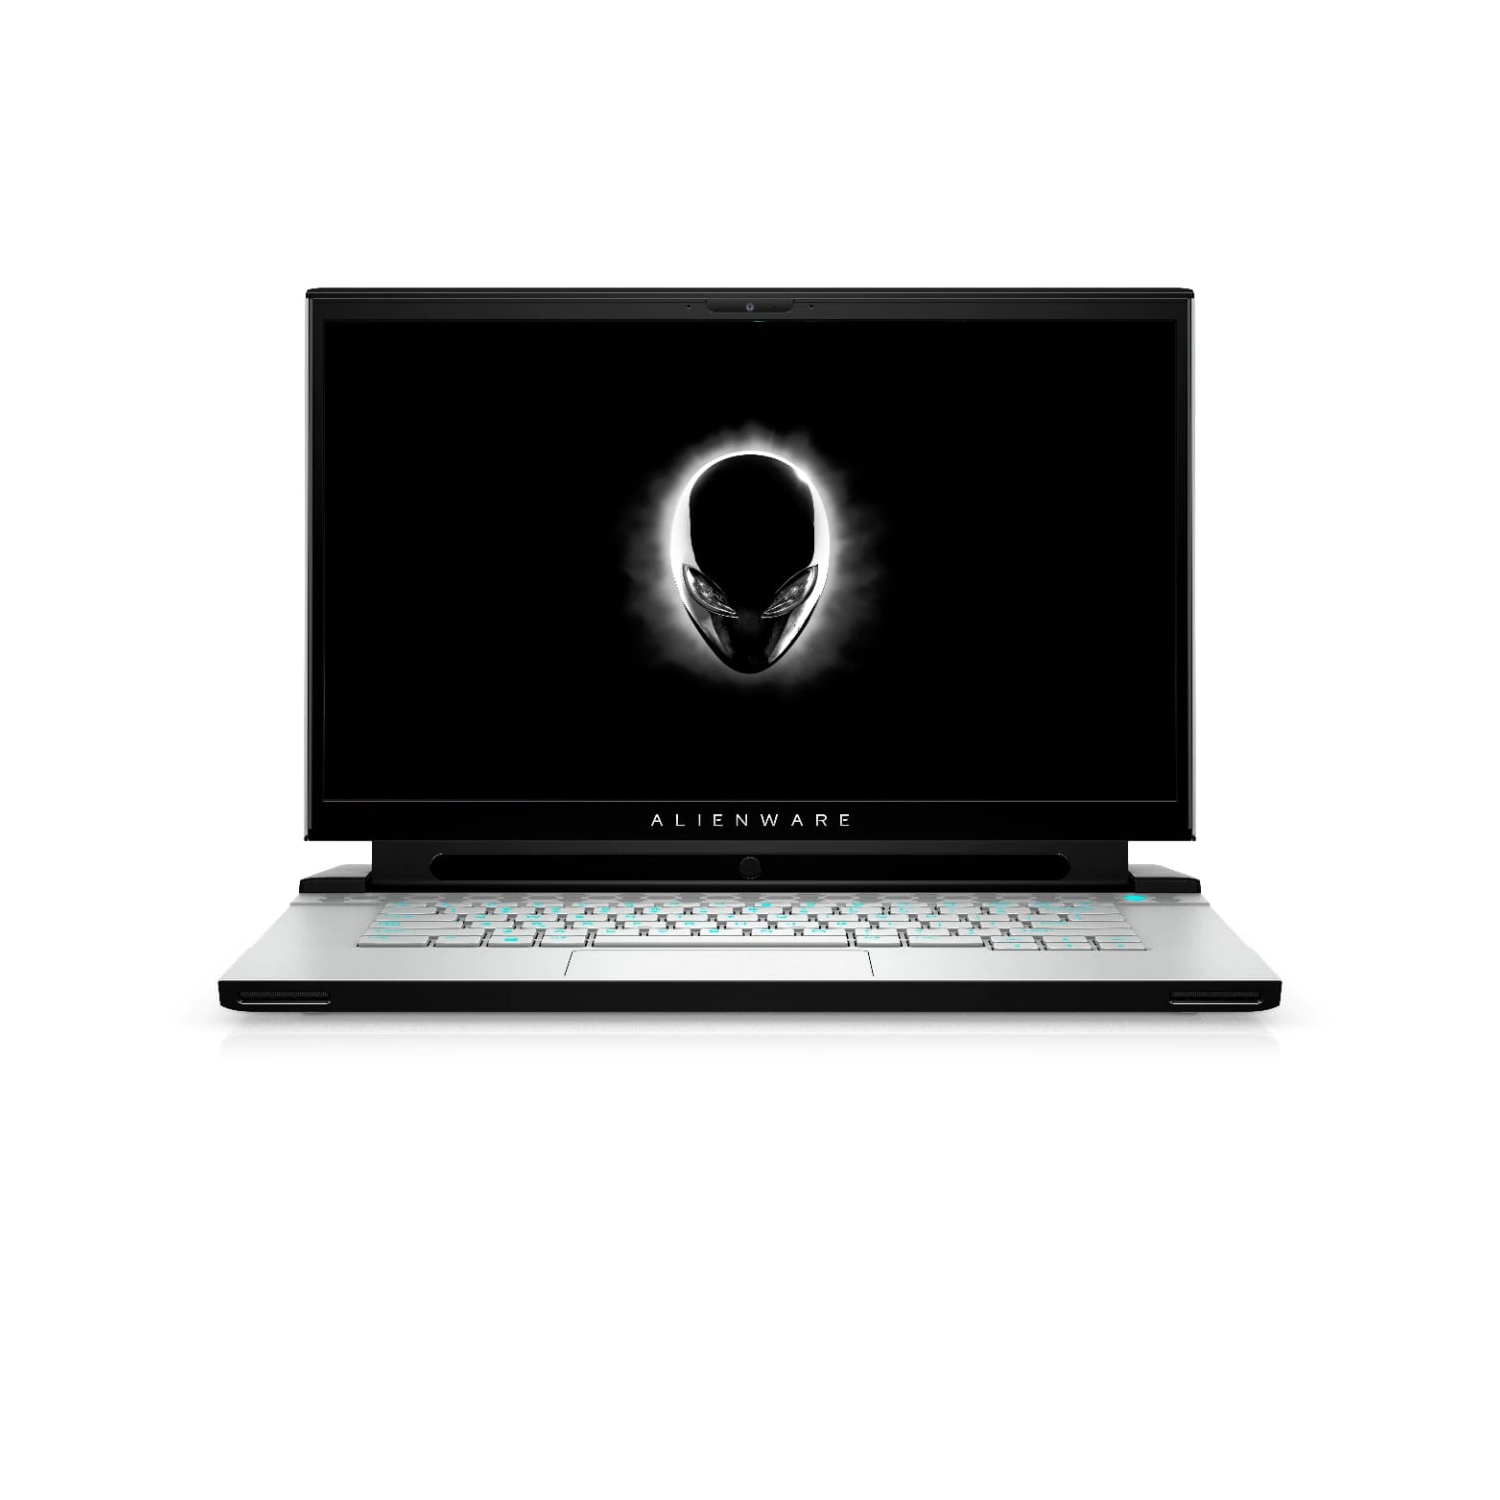 Refurbished (Excellent) - Dell Alienware m15 R3 Gaming Laptop (2020), 15.6" FHD, Core i7, 512GB SSD, 16GB RAM, RTX 2060, 6 Cores @ 5 GHz, 10th Gen CPU Certified